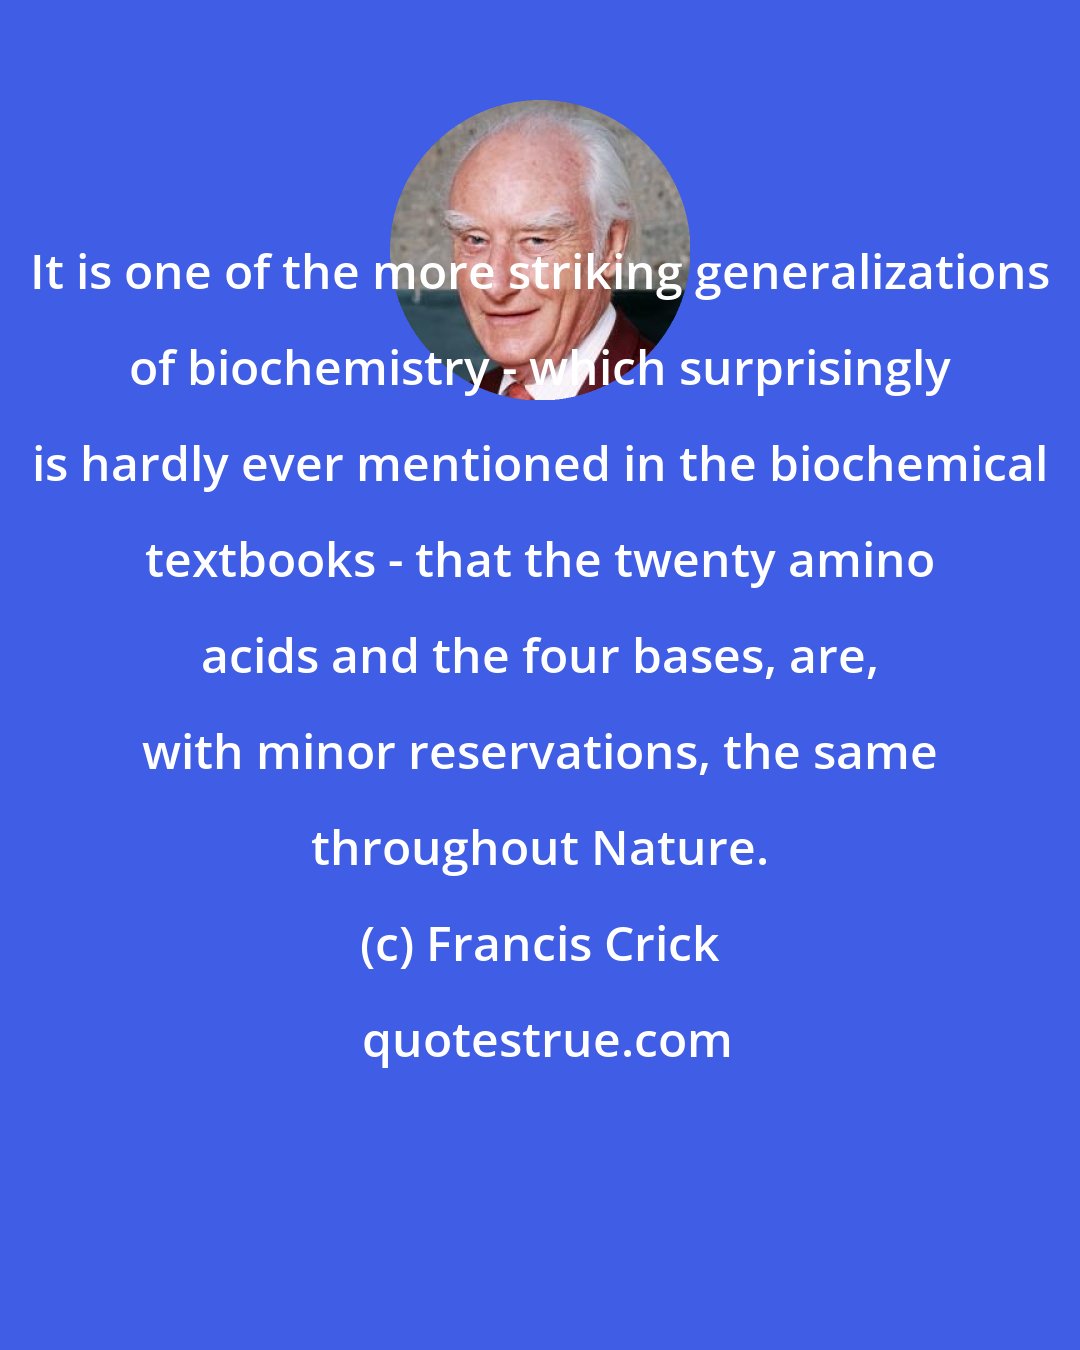 Francis Crick: It is one of the more striking generalizations of biochemistry - which surprisingly is hardly ever mentioned in the biochemical textbooks - that the twenty amino acids and the four bases, are, with minor reservations, the same throughout Nature.